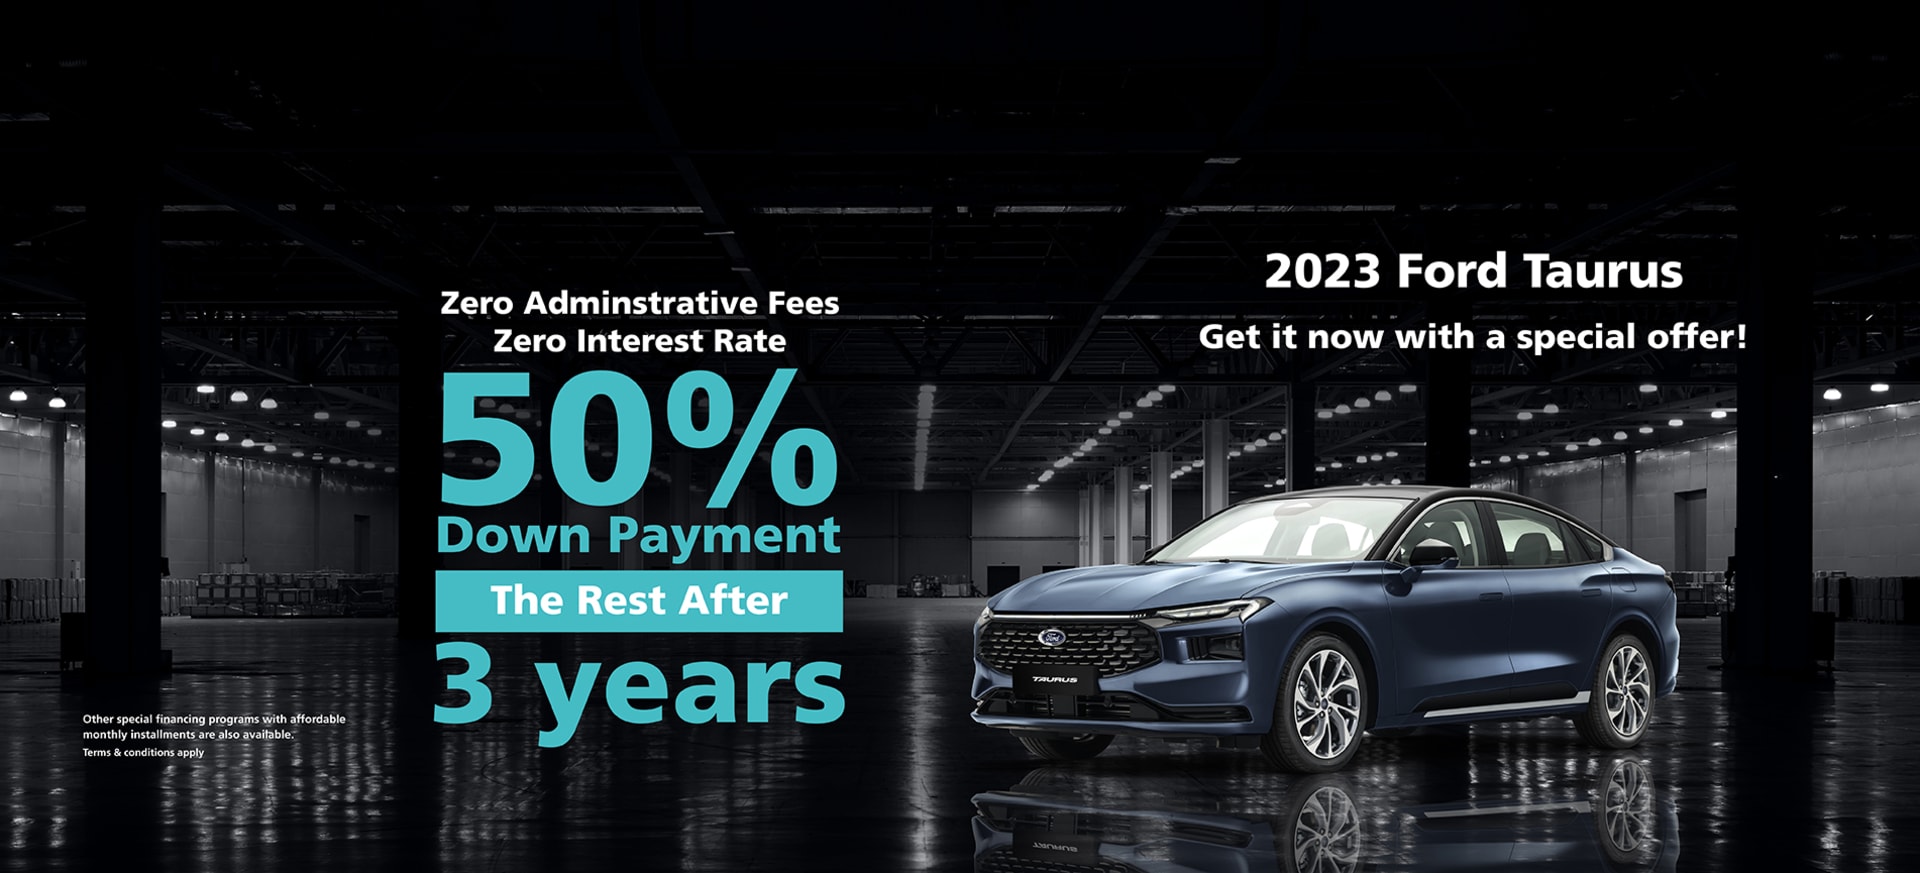 2023 Ford Taurus Special Offer